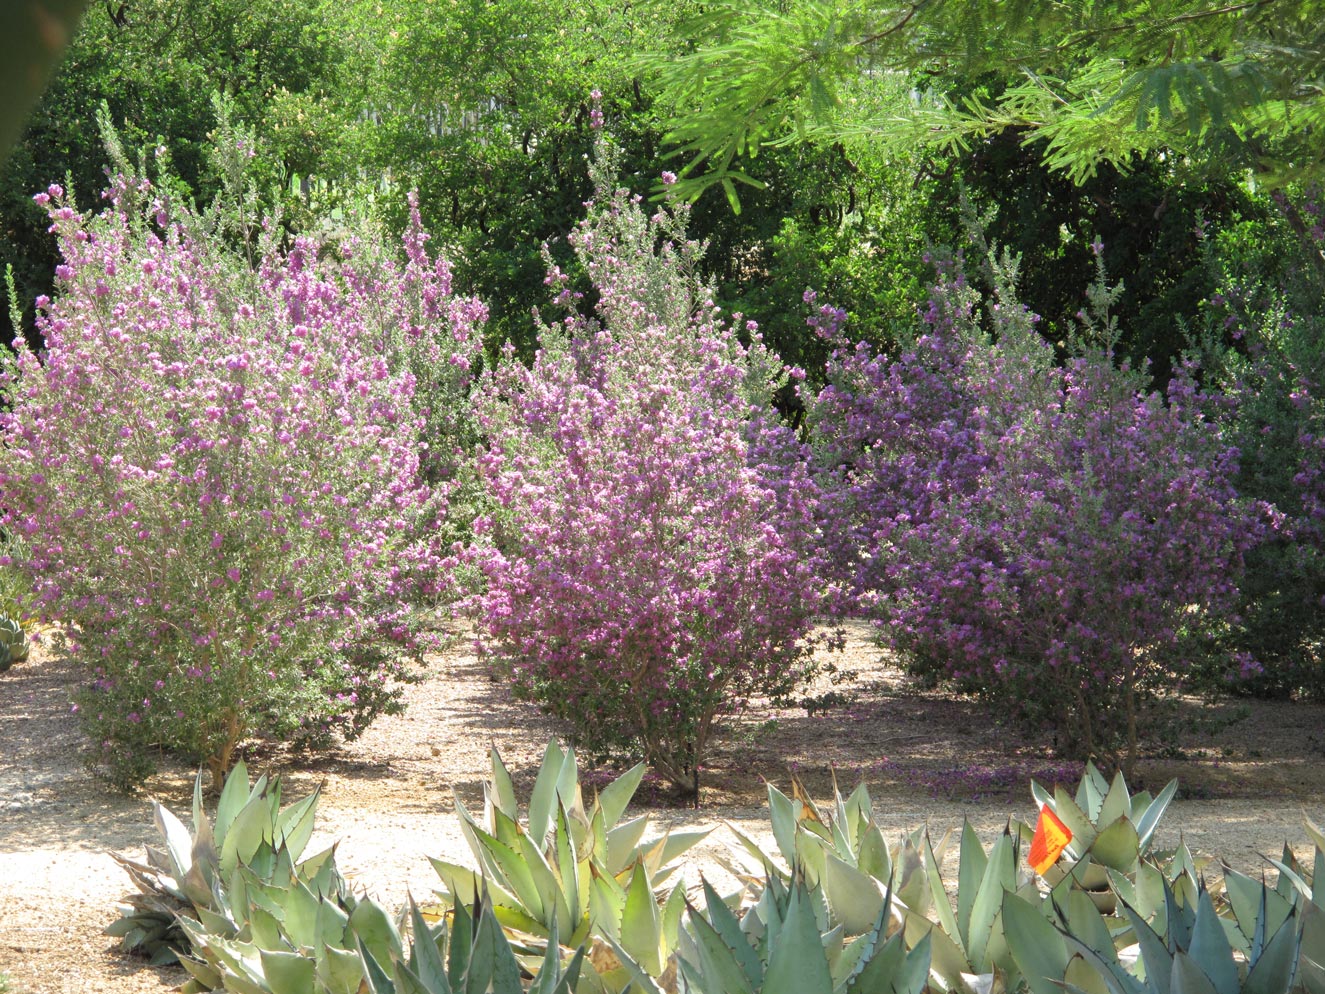 Smaller leucophyllum shrubs bloom with small agave in the foreground.